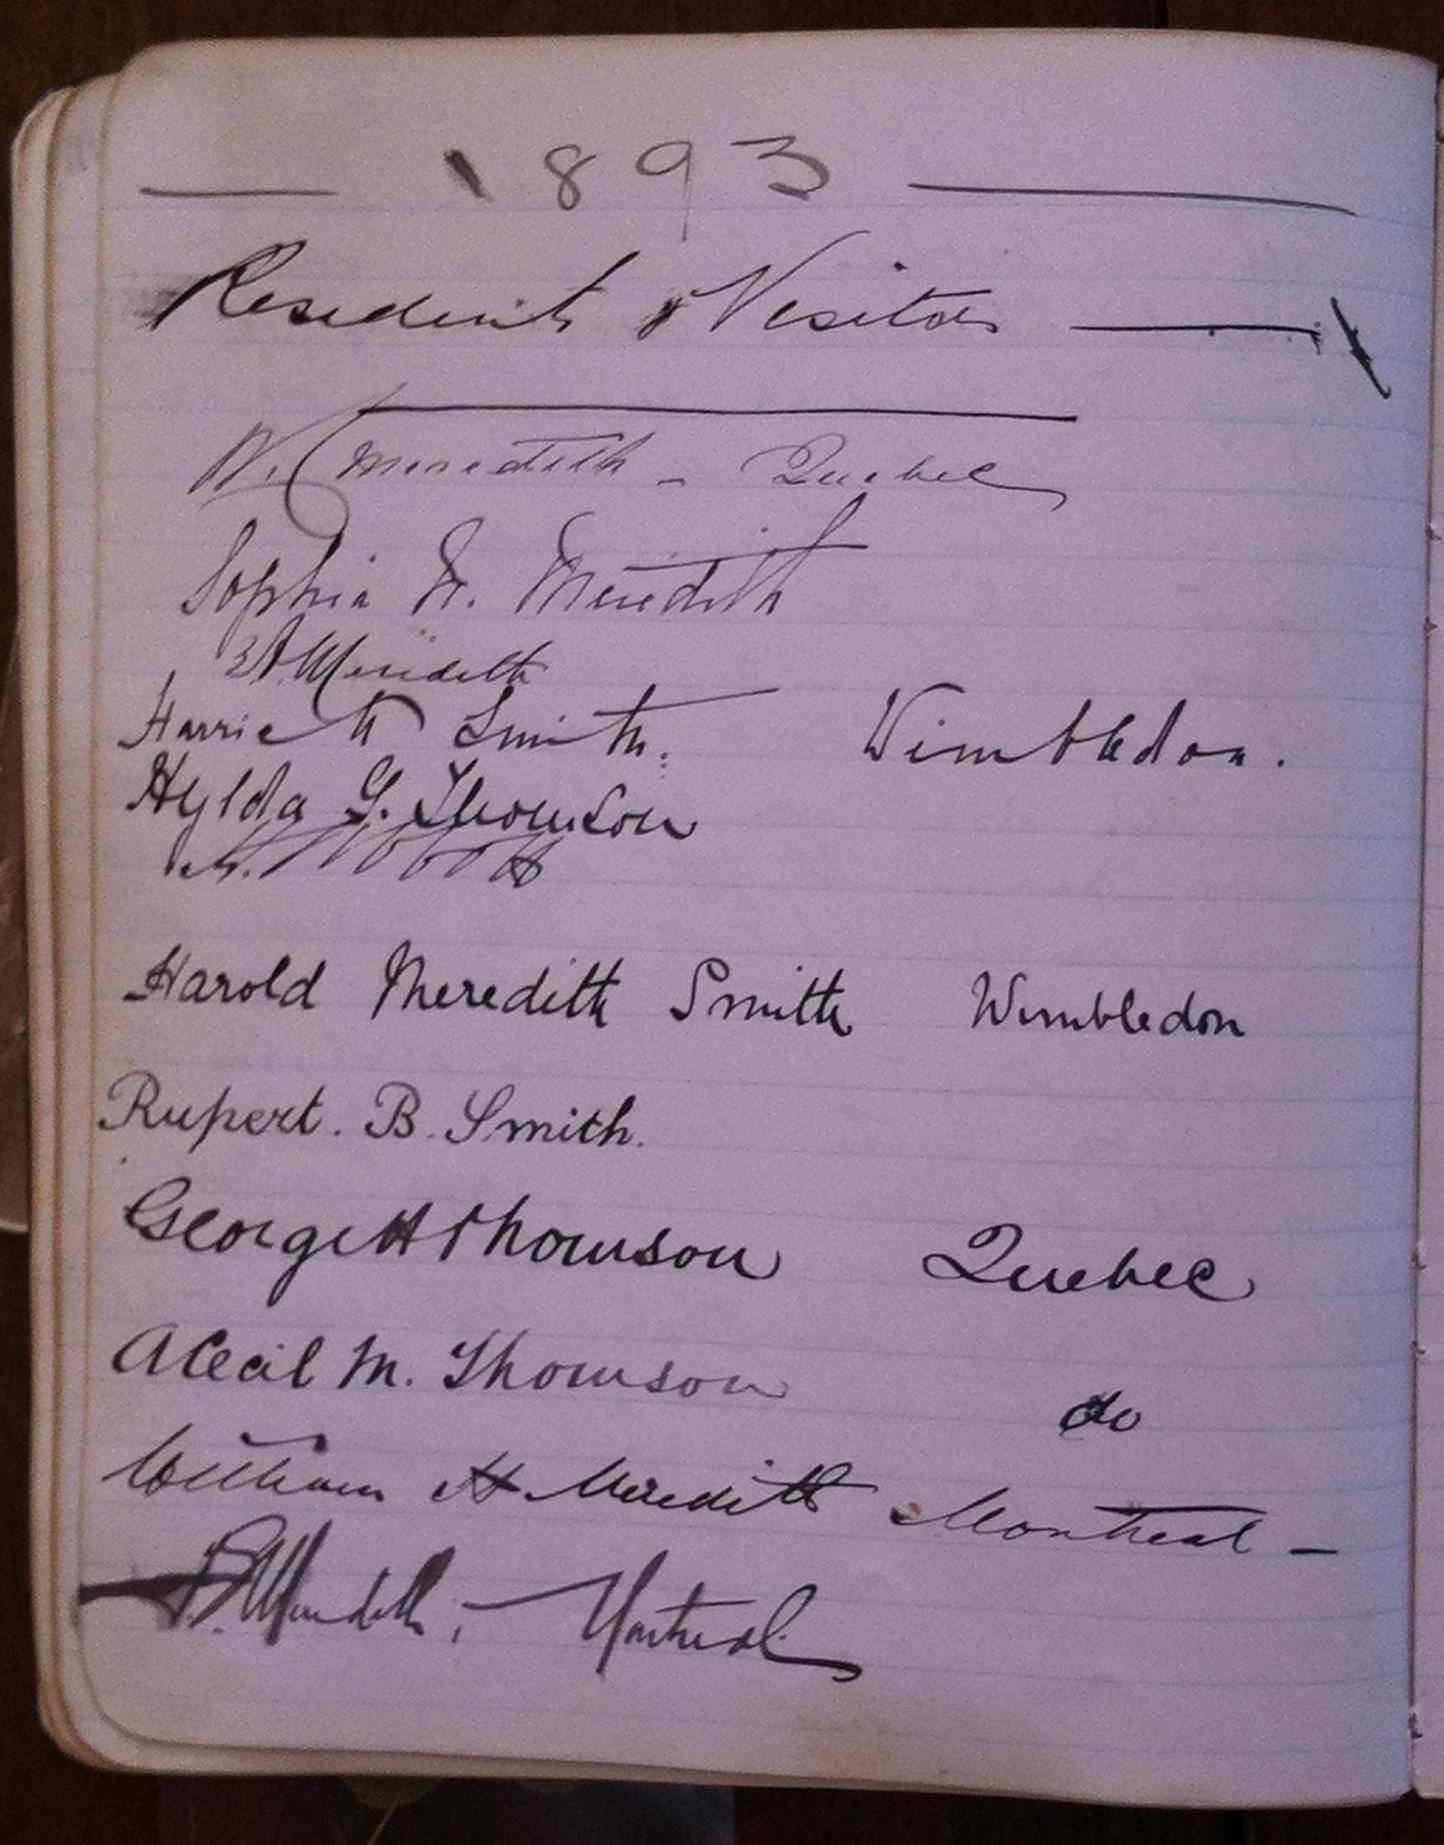 A page from an old diary, on which several names are written with a feather pen.